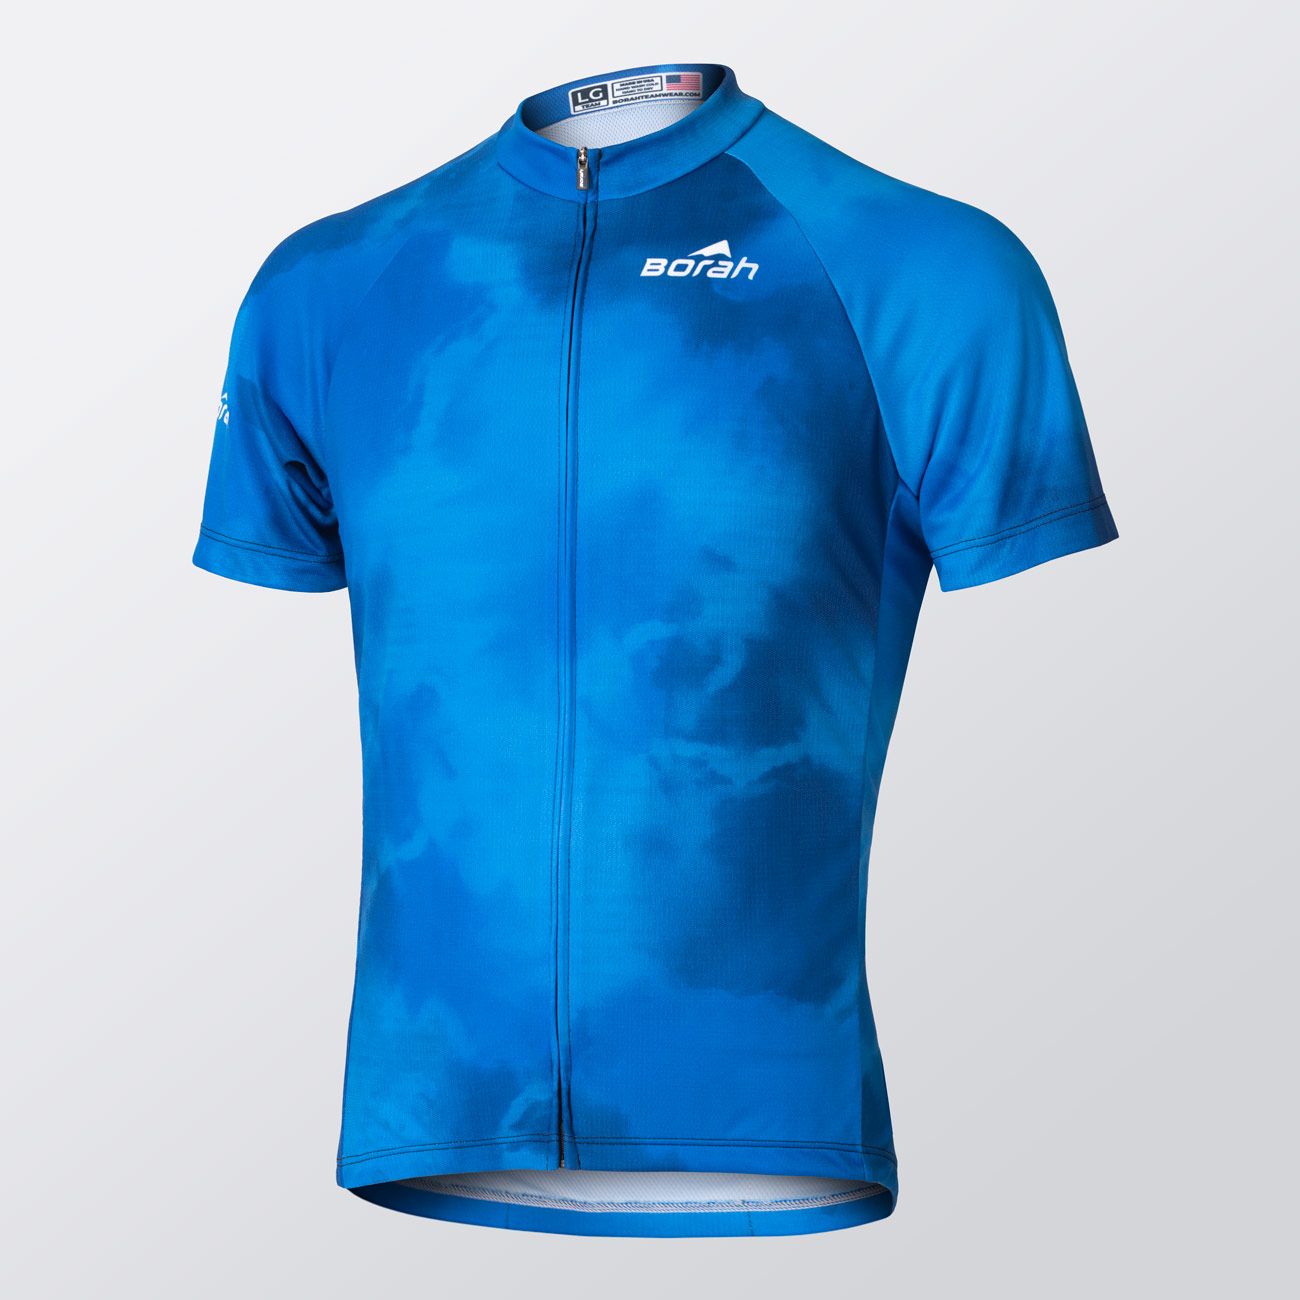 Full Custom Team Cycling Jersey front view